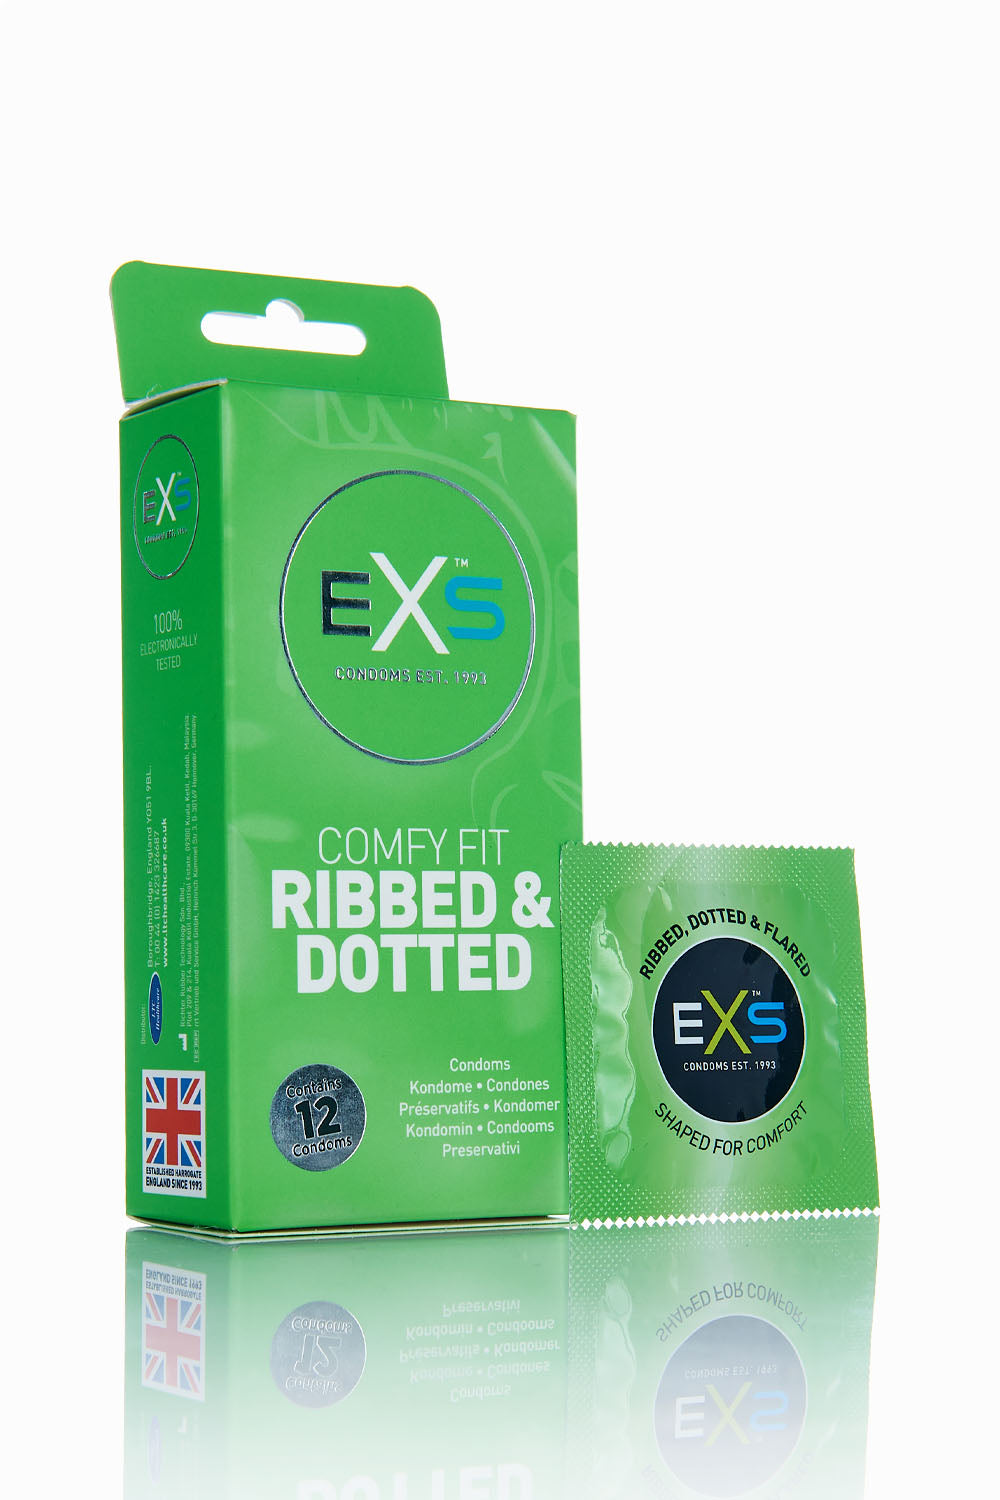 EXS Ribbed, Dotted & Flared Condoms 12 Pack